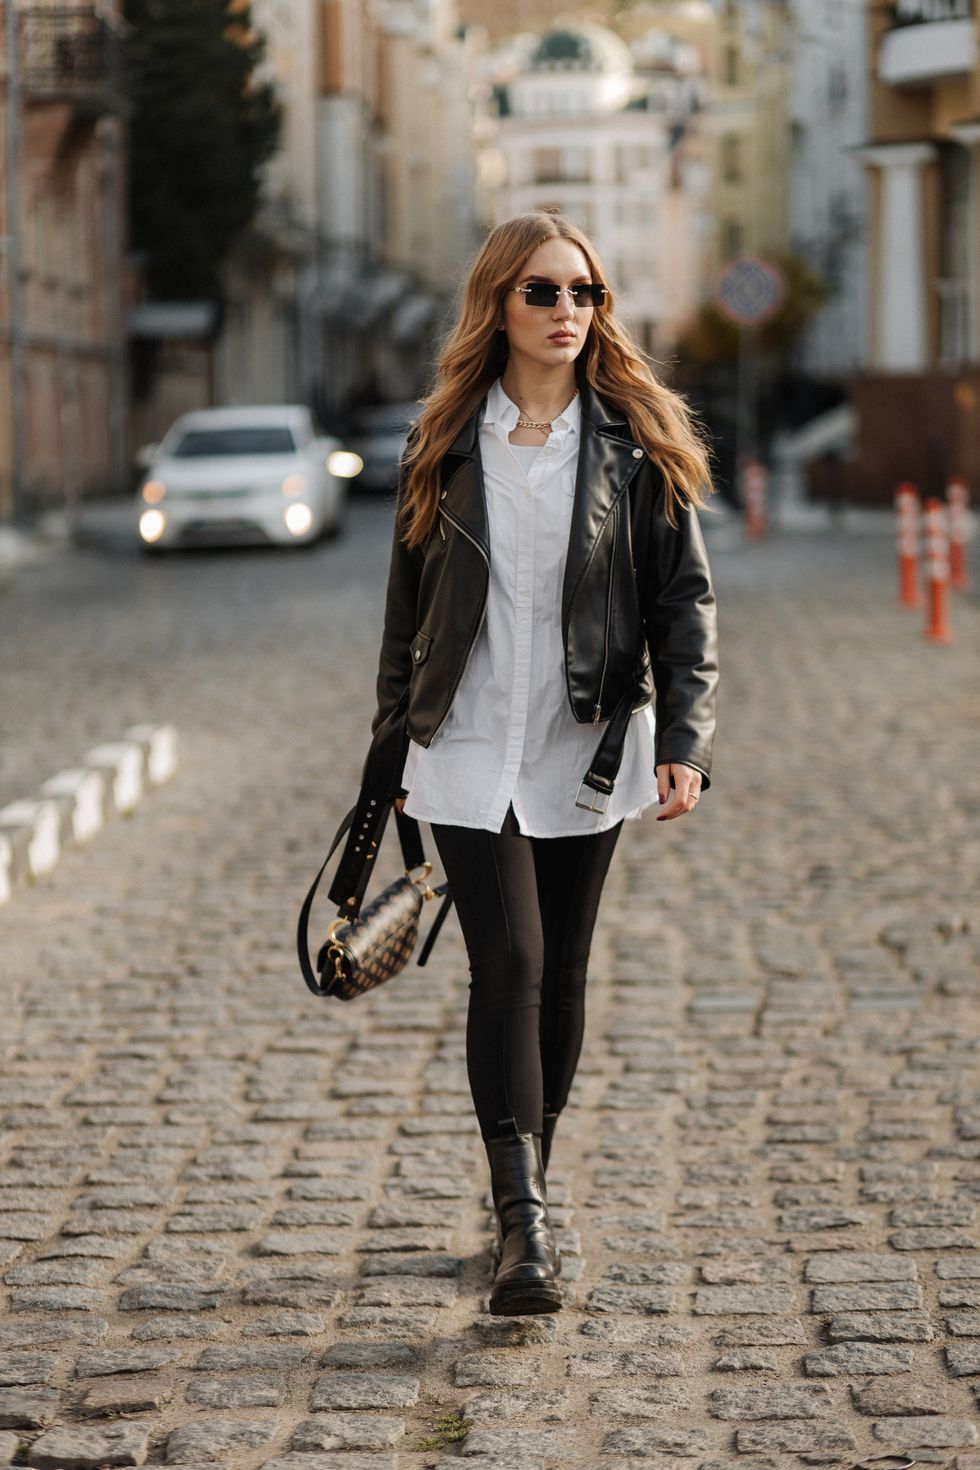 fashionable blonde woman model with black leather jacket and style sunglasses walking the city street